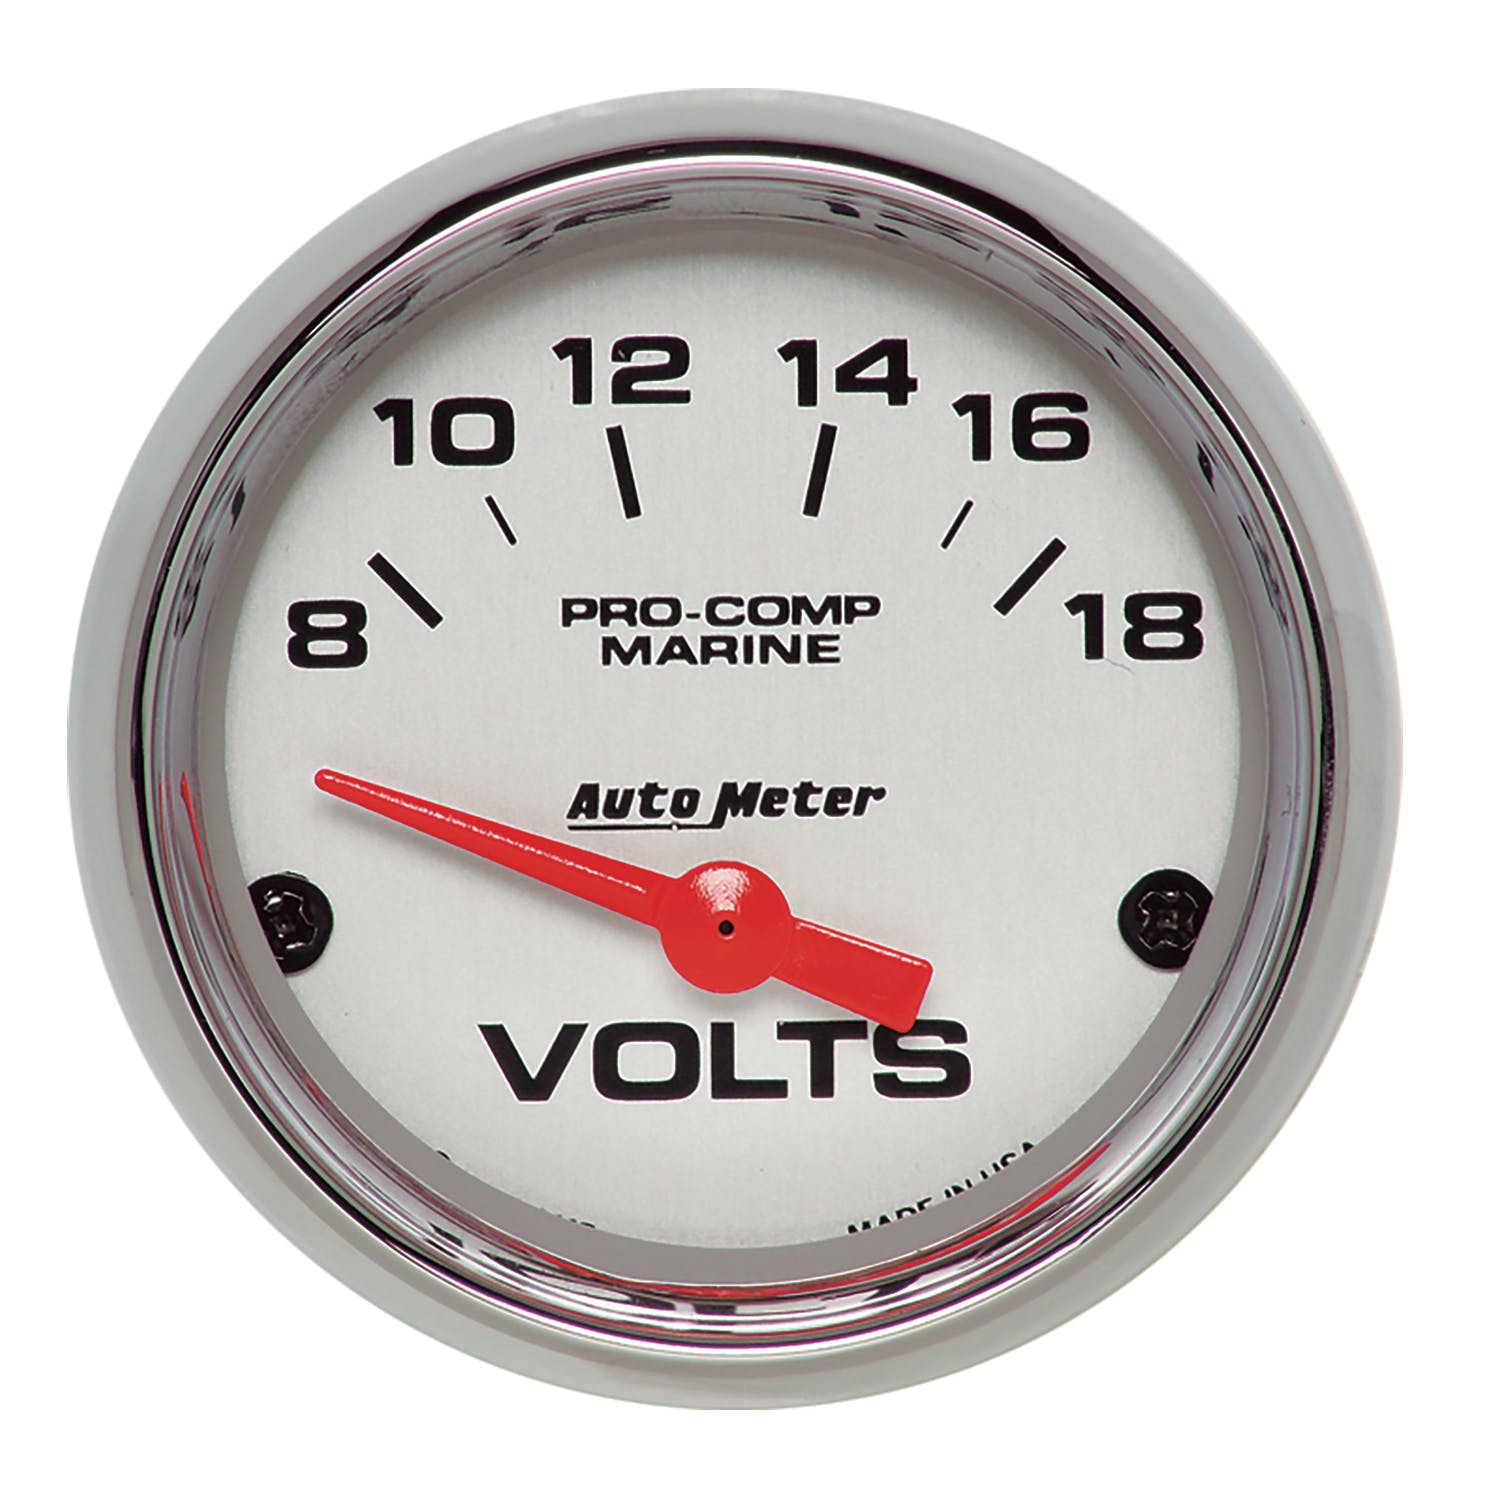 AutoMeter Products 200756-35 Gauge; Voltmeter; 2 1/16in.; 18V; Electric; Marine Chrome